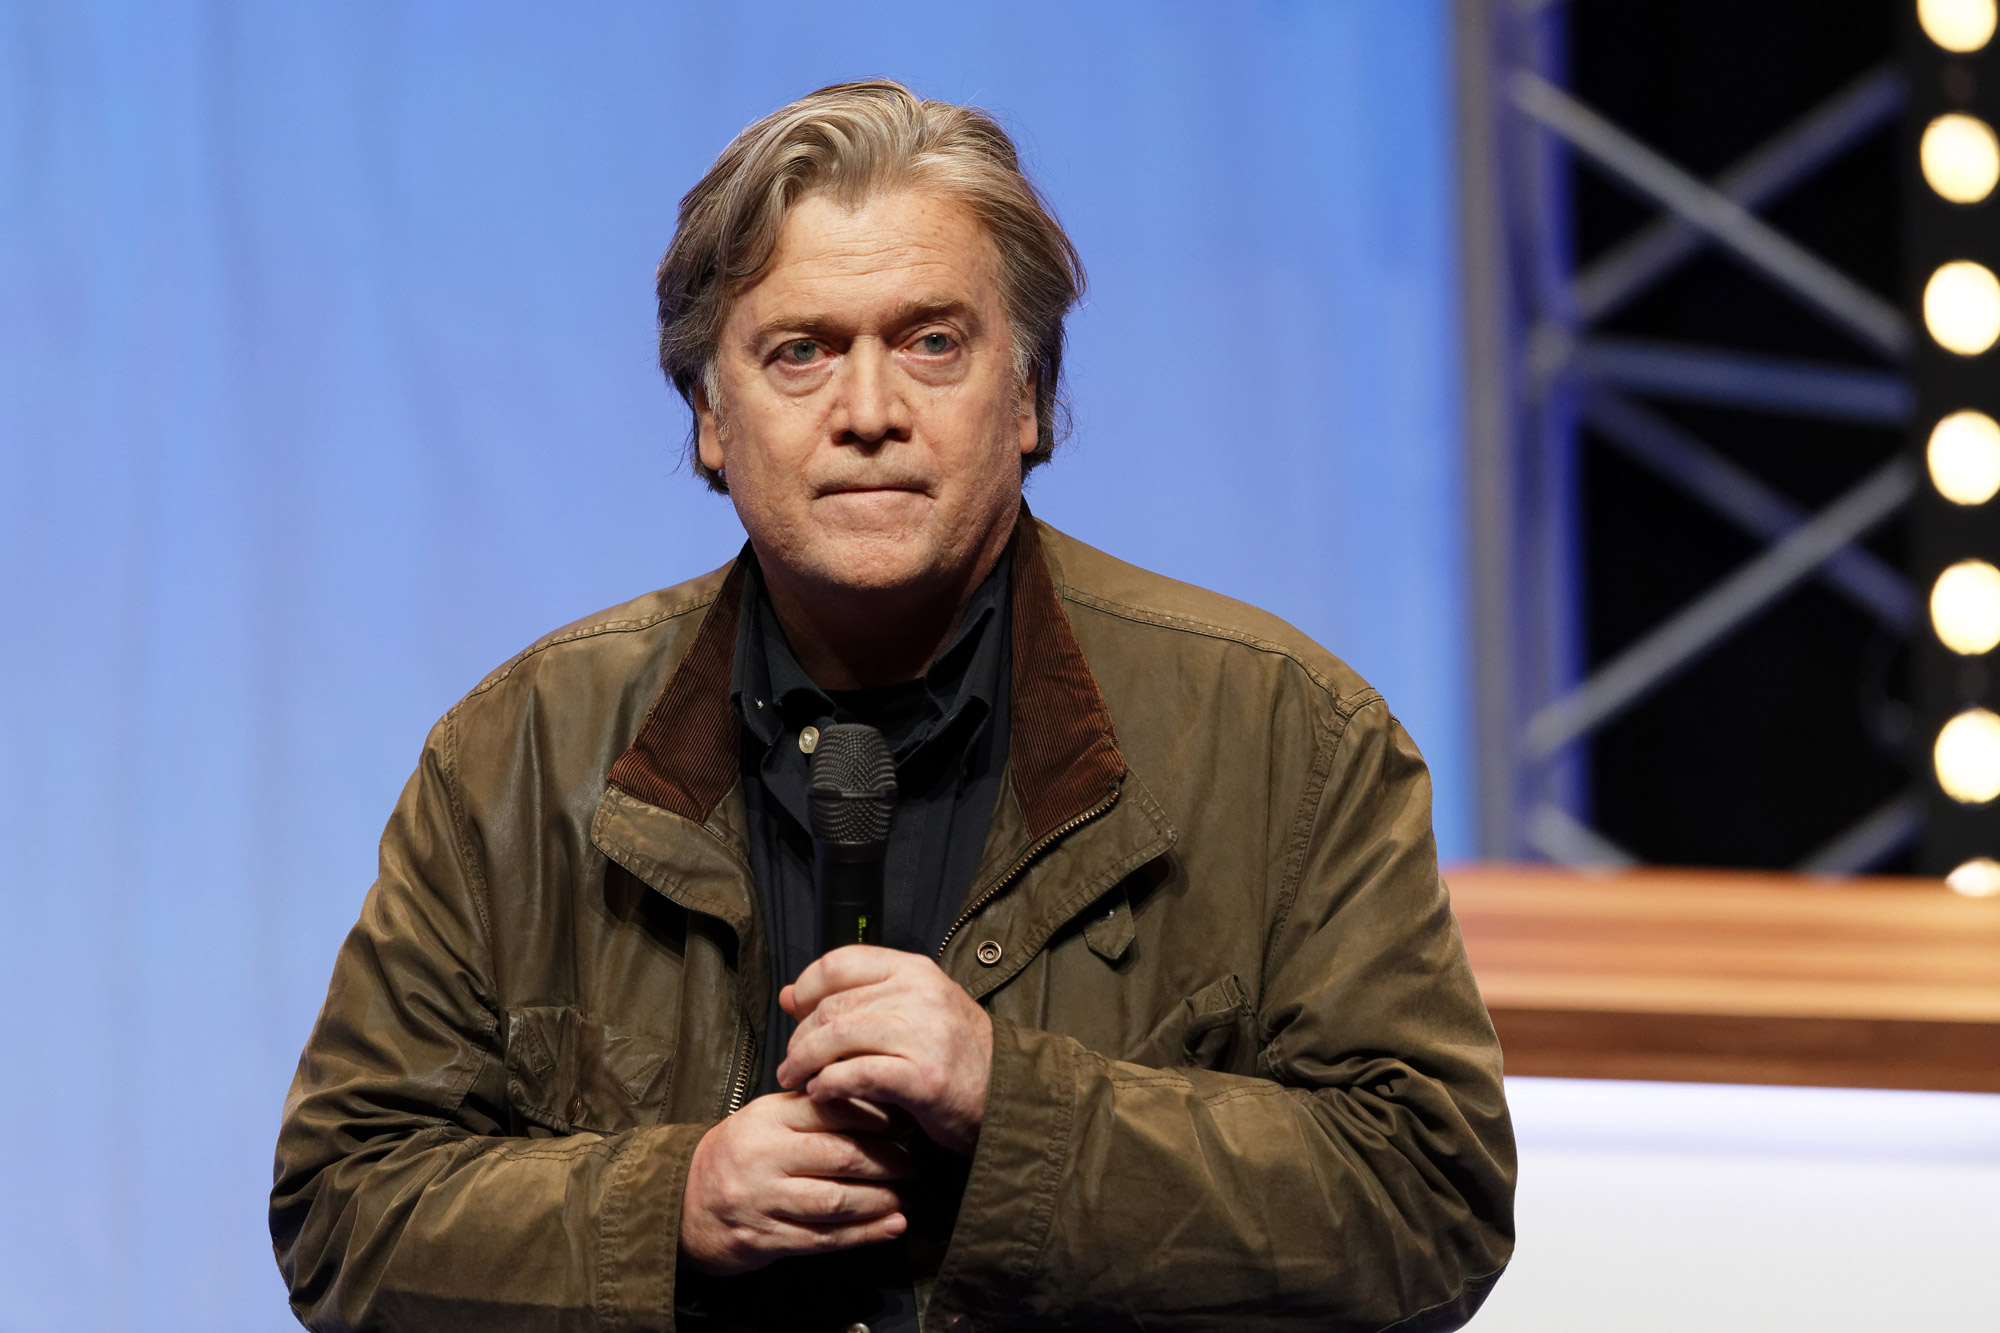 Former US President advisor Steve Bannon delivers a speech during the Front National party annual congress on March 10, 2018 in Lille, France. 